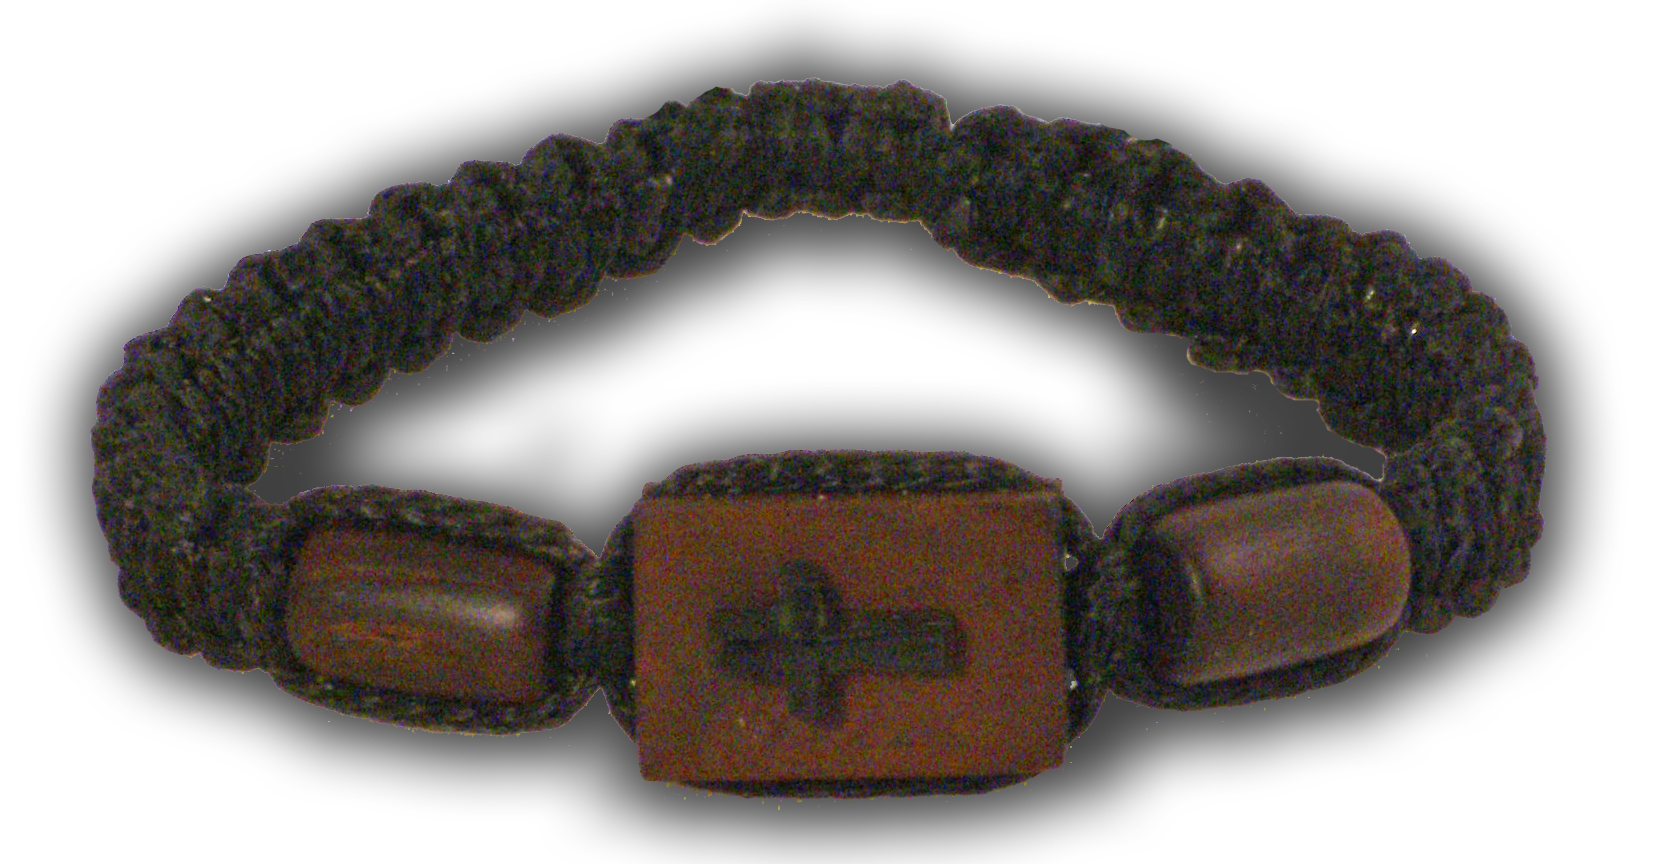 Hand Wrist Praying Rope with Wooden Cross